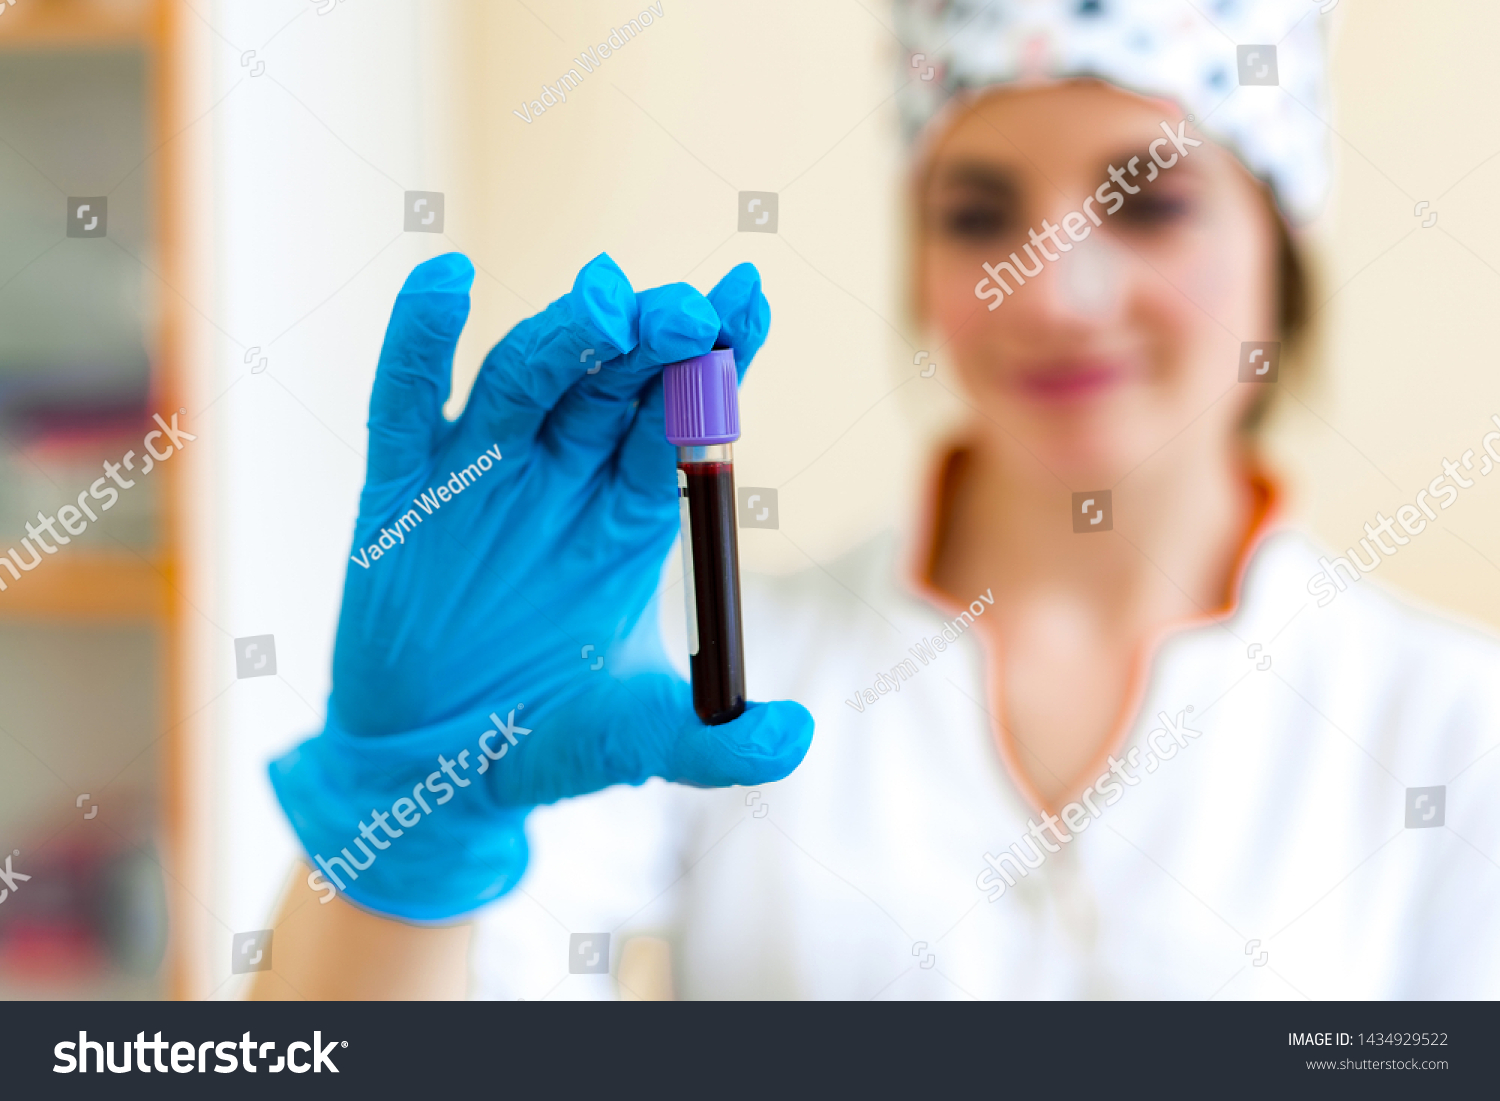 Test tube with blood in the hand of a laboratory technician. Female specialist is holding a vial of red liquid with sterile blue glove indoors. Close-up. #1434929522